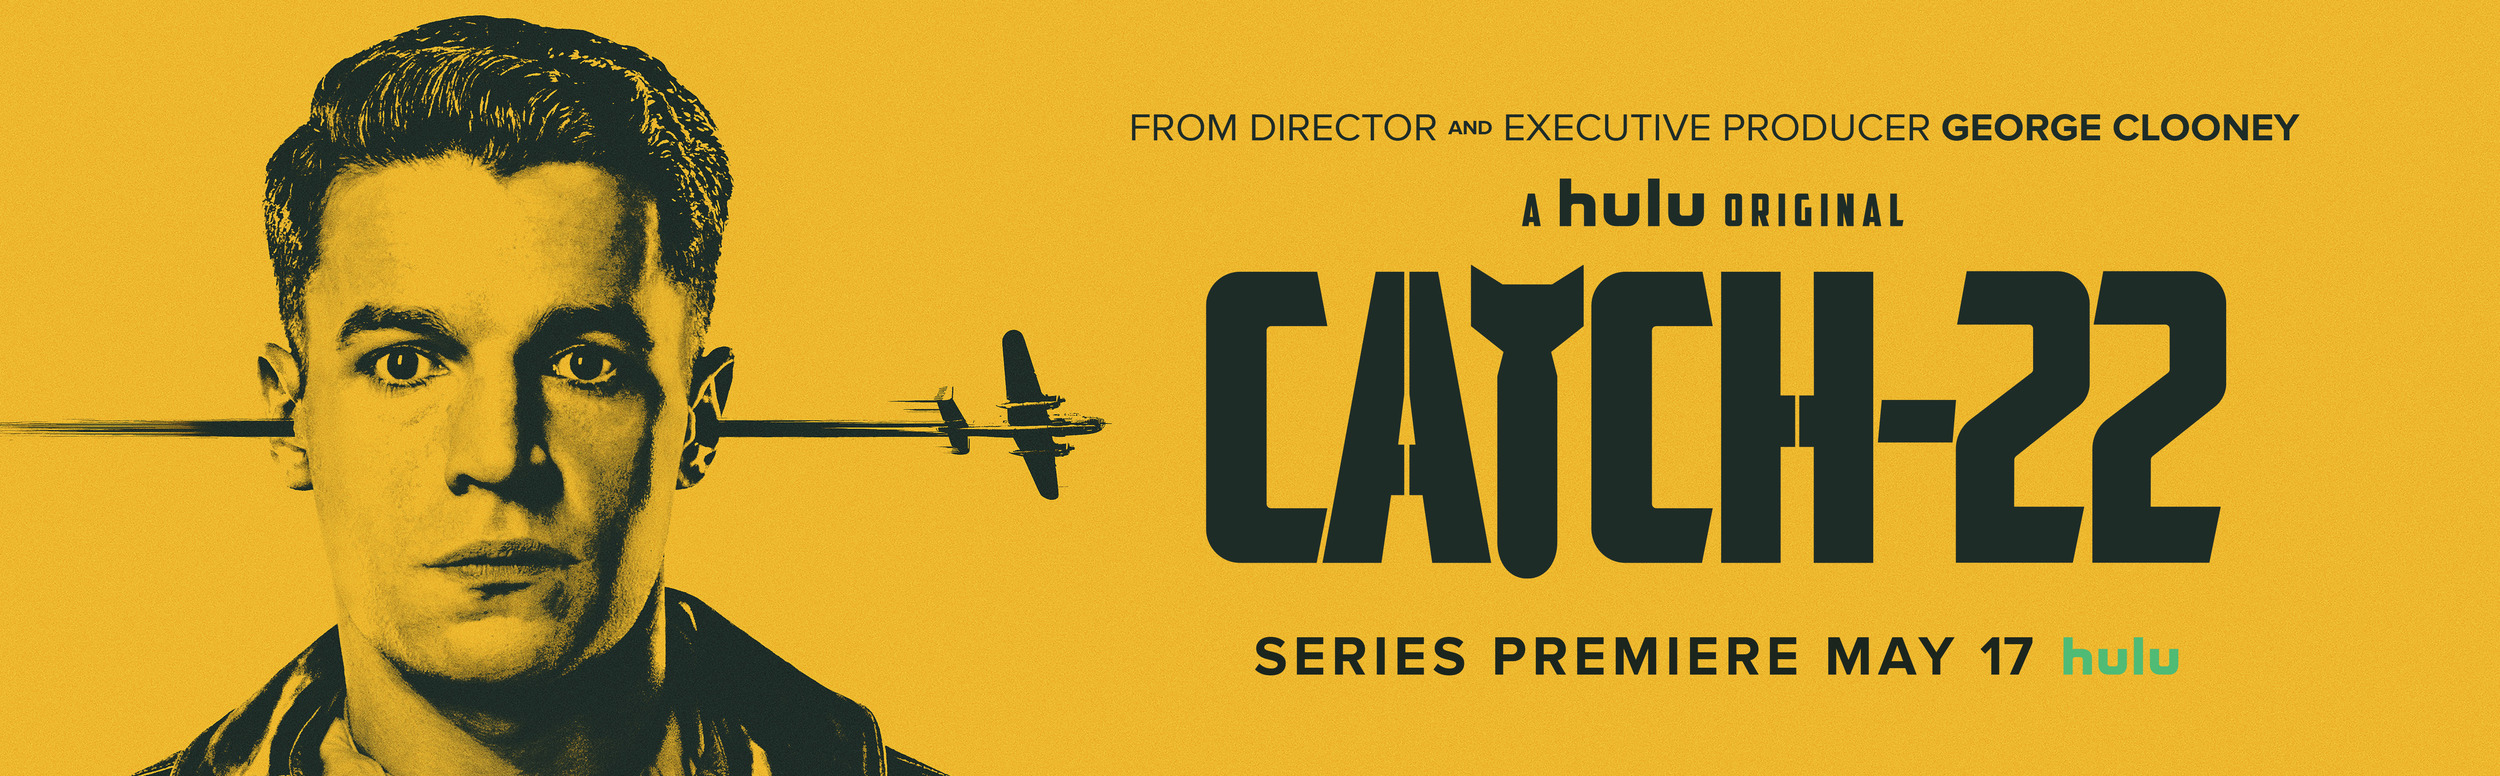 Mega Sized TV Poster Image for Catch-22 (#3 of 8)